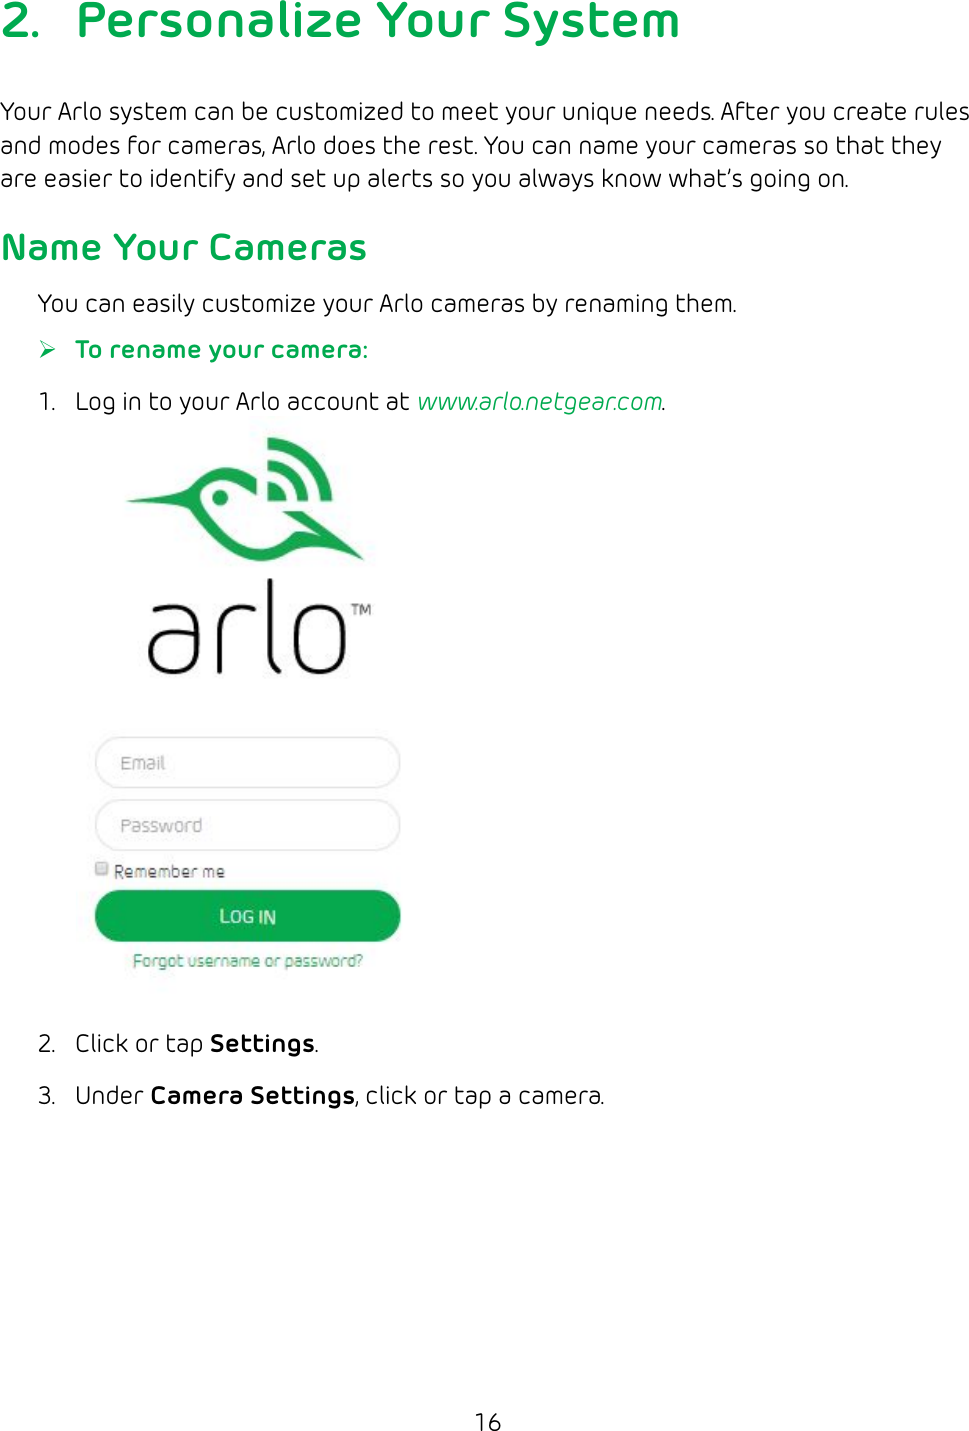 162.  Personalize Your SystemYour Arlo system can be customized to meet your unique needs. After you create rules and modes for cameras, Arlo does the rest. You can name your cameras so that they are easier to identify and set up alerts so you always know what’s going on.Name Your CamerasYou can easily customize your Arlo cameras by renaming them. ¾To rename your camera: 1.  Log in to your Arlo account at www.arlo.netgear.com.2.  Click or tap Settings. 3.  Under Camera Settings, click or tap a camera.